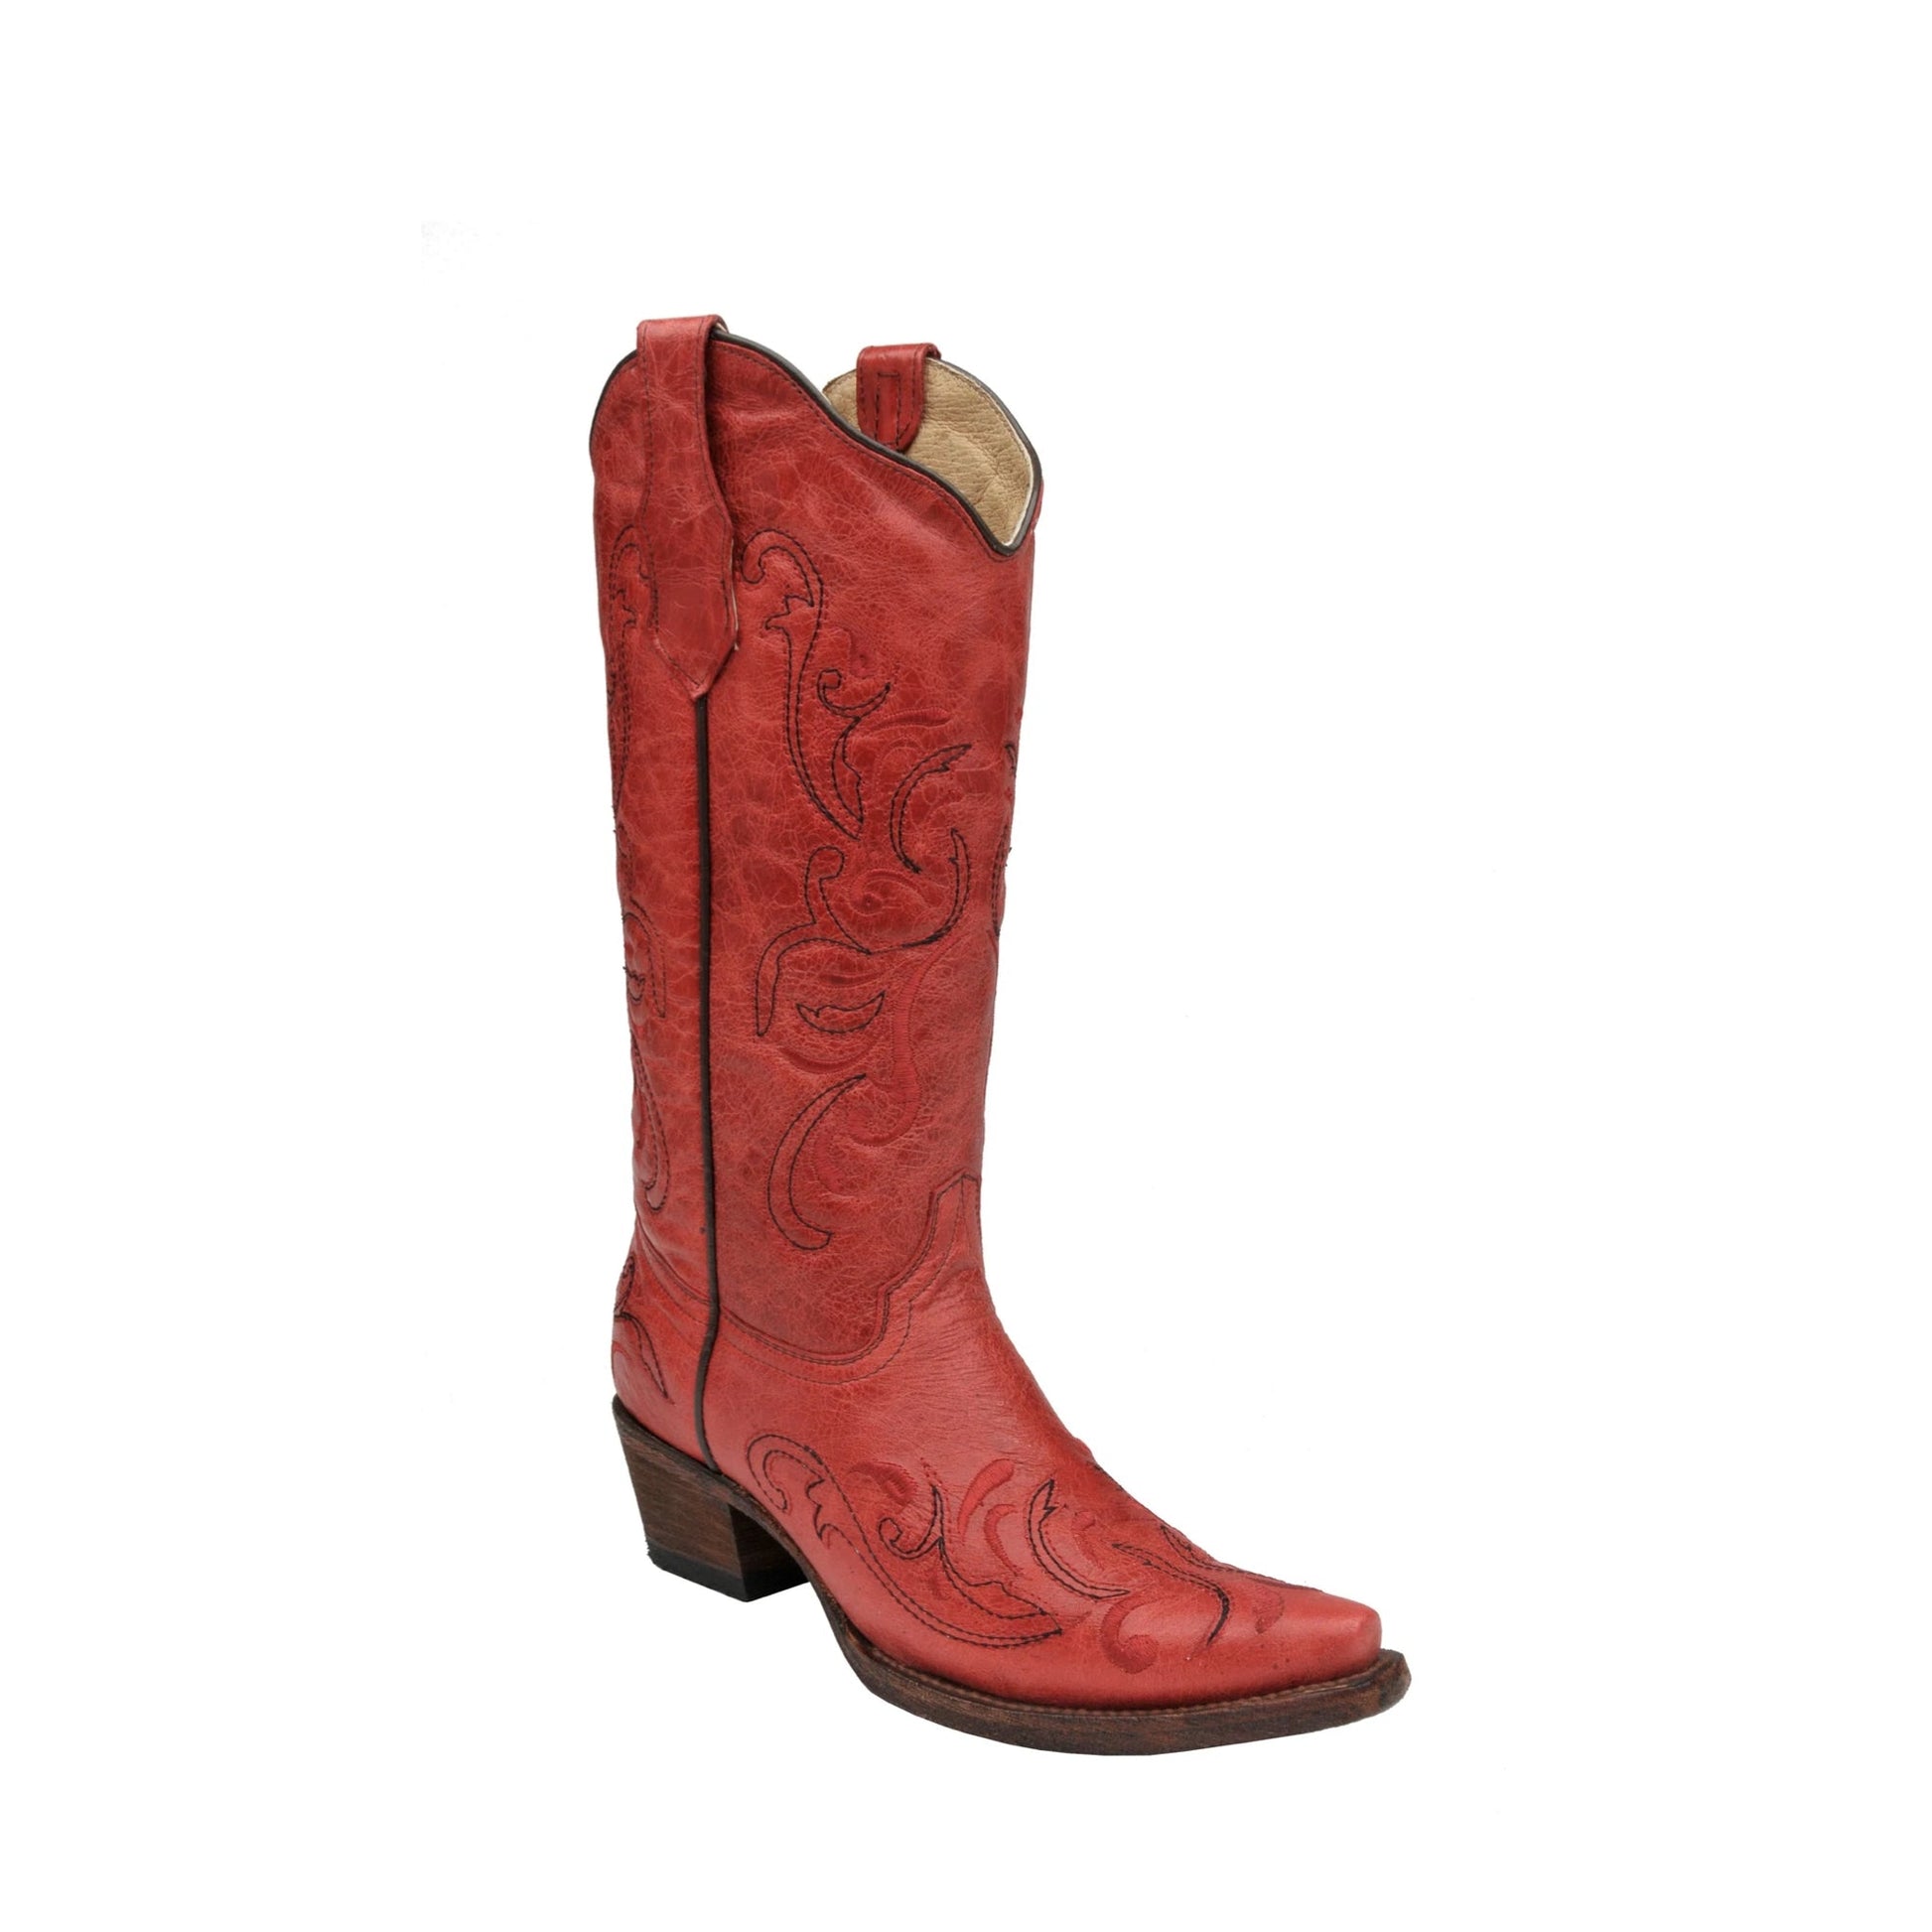 L5129 - Circle G red western cowgirl leather boots for women-BOOTS-kuet